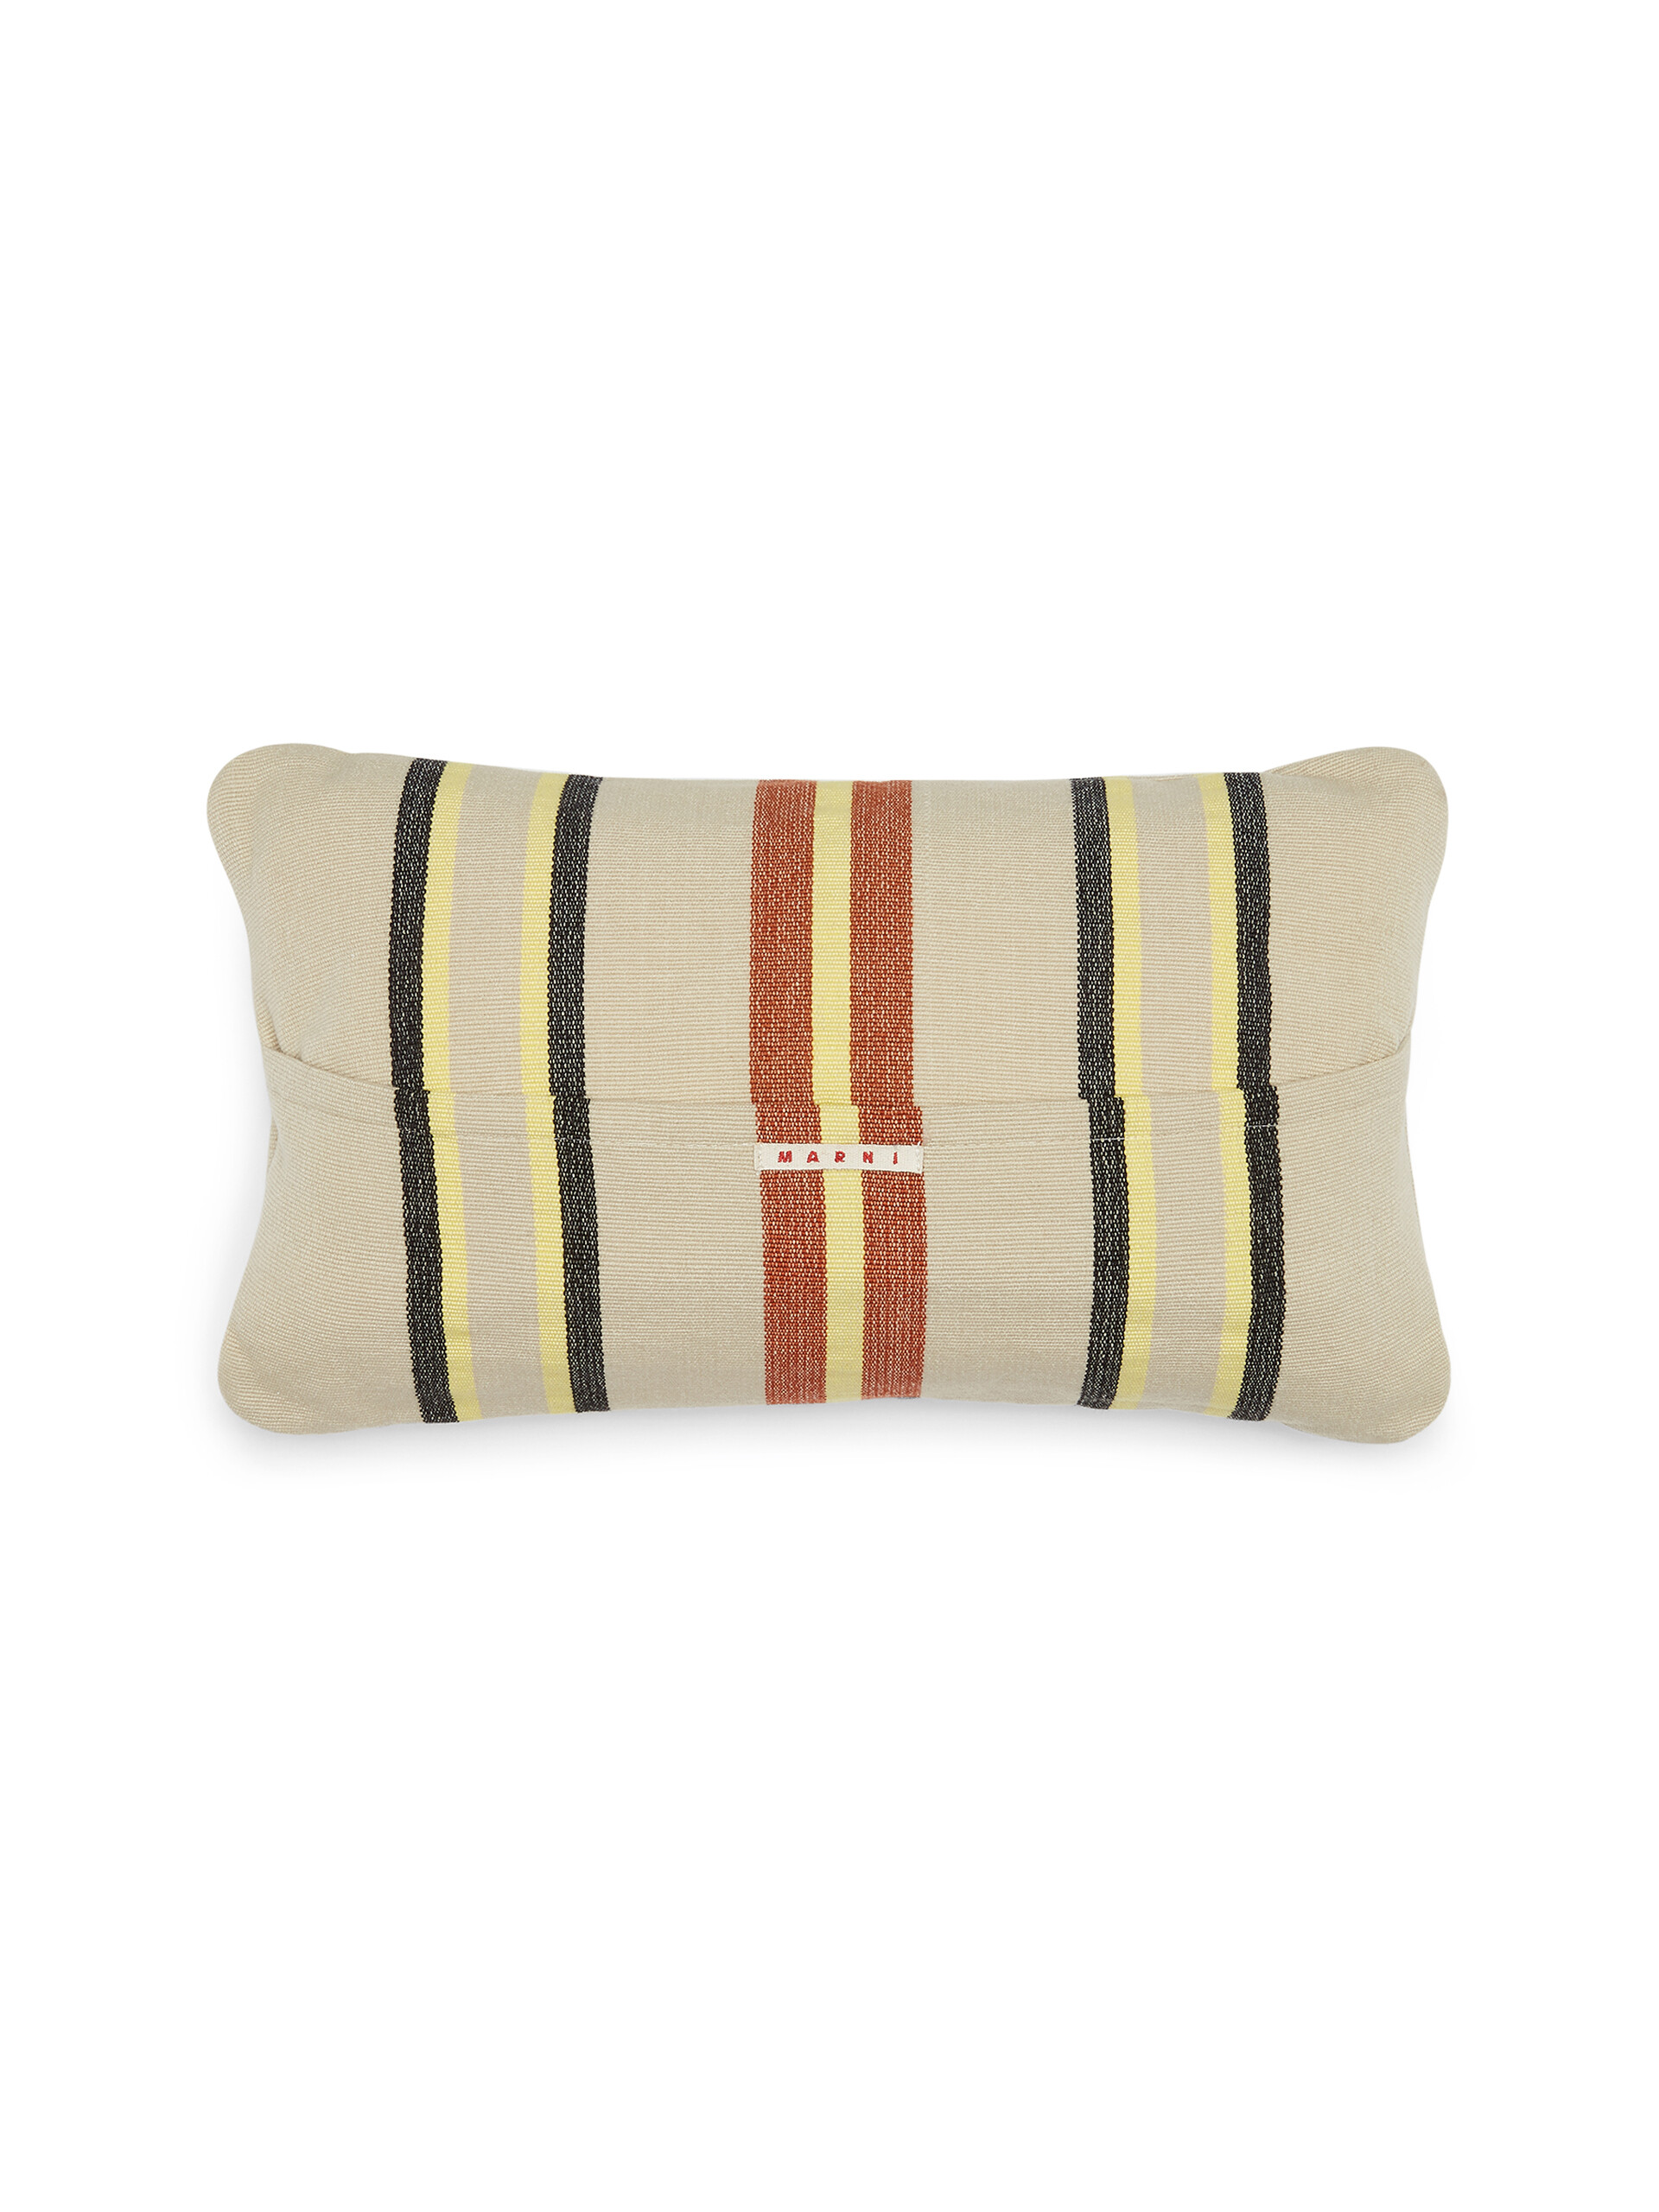 MARNI MARKET rectangular pillow cover in polyester green burgundy and pale blue - Furniture - Image 2